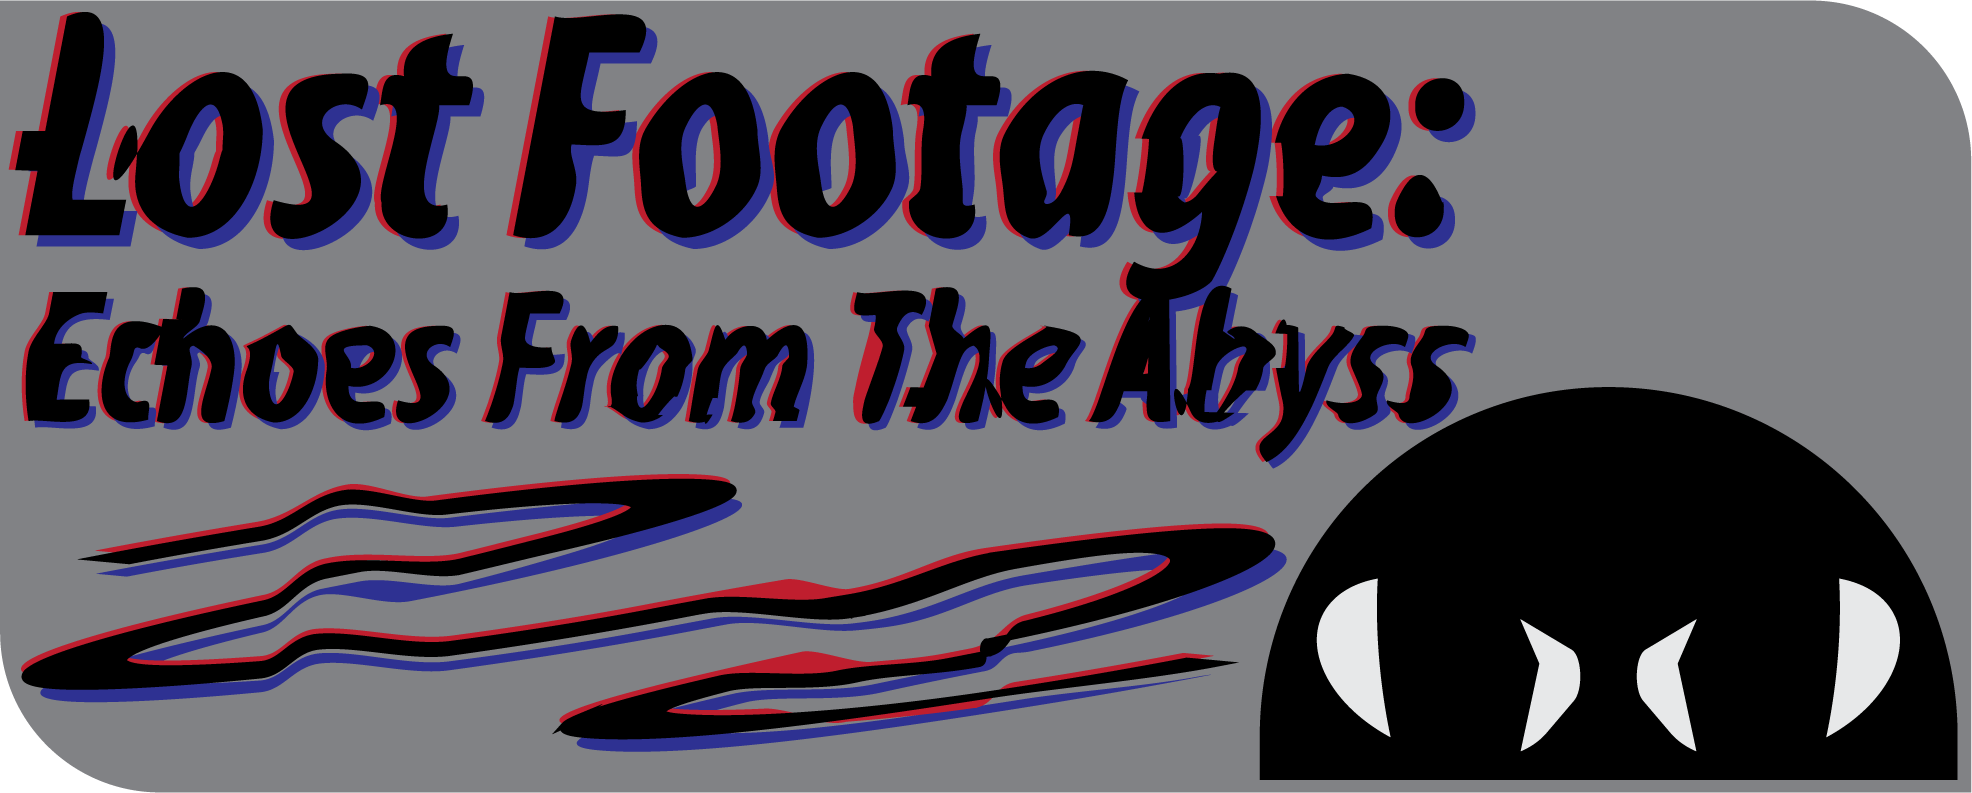 Lost Footage: Echoes From The Abyss